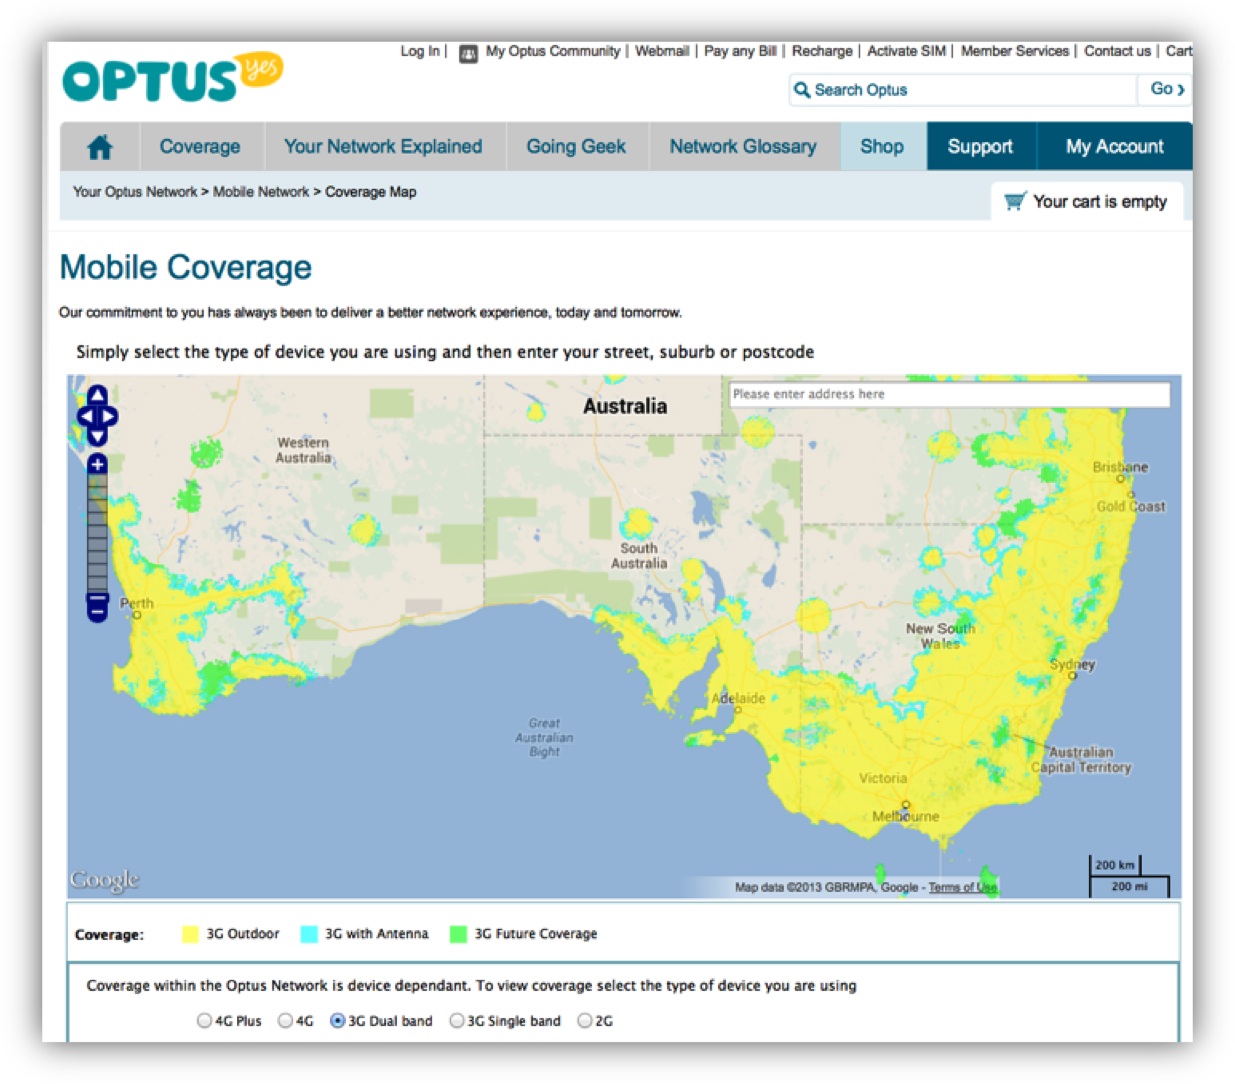 Fig. 2 Optus 3G dual band mobile coverage map